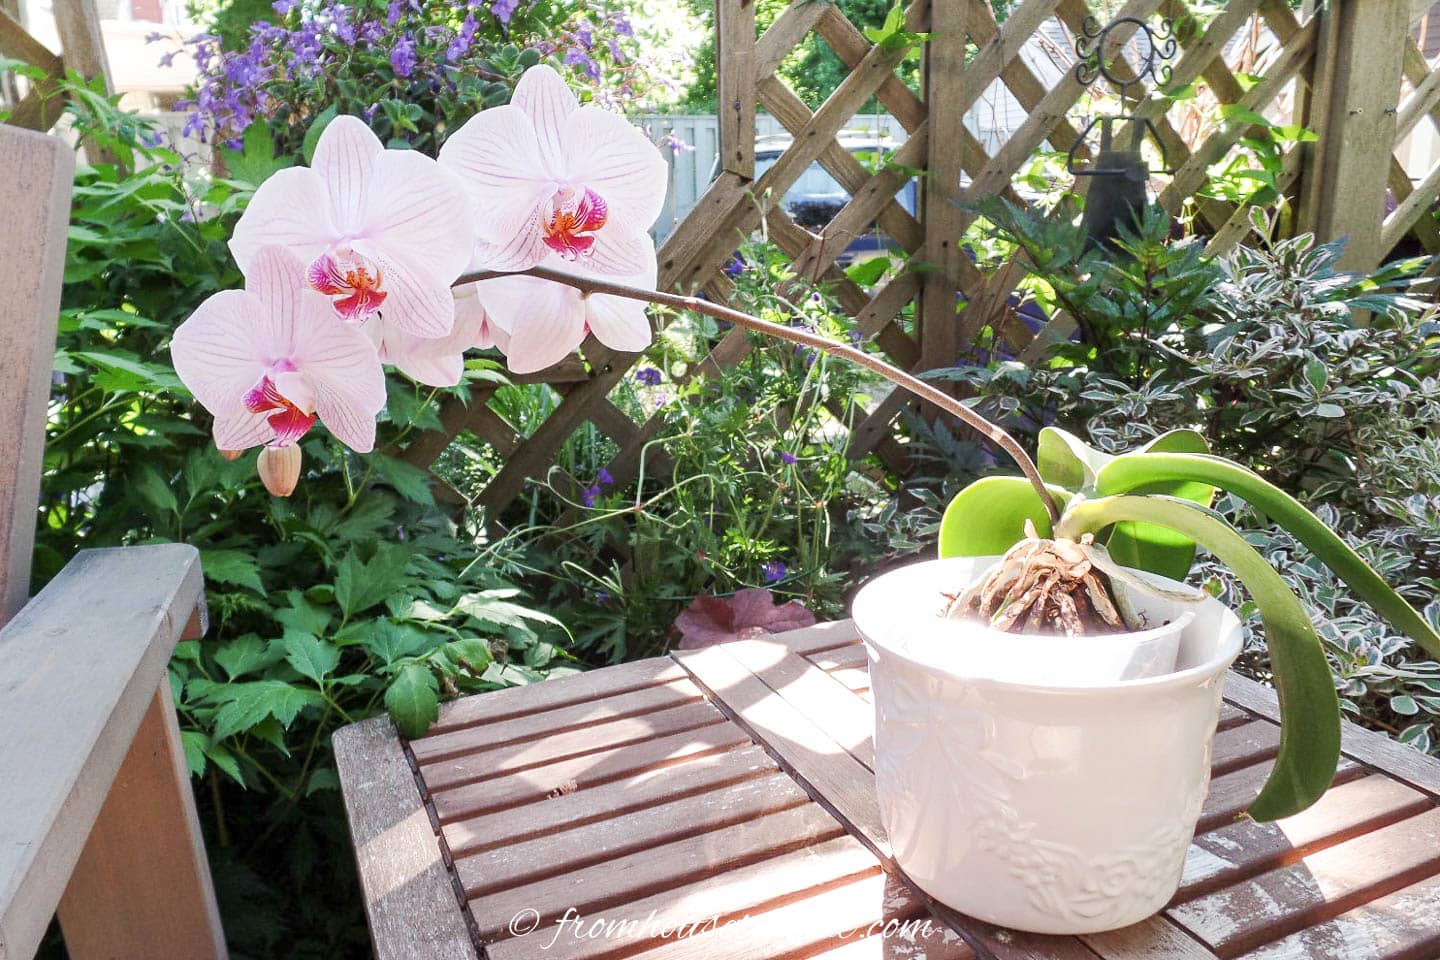 Phalaenopsis orchid growing in a pot on a patio table outside